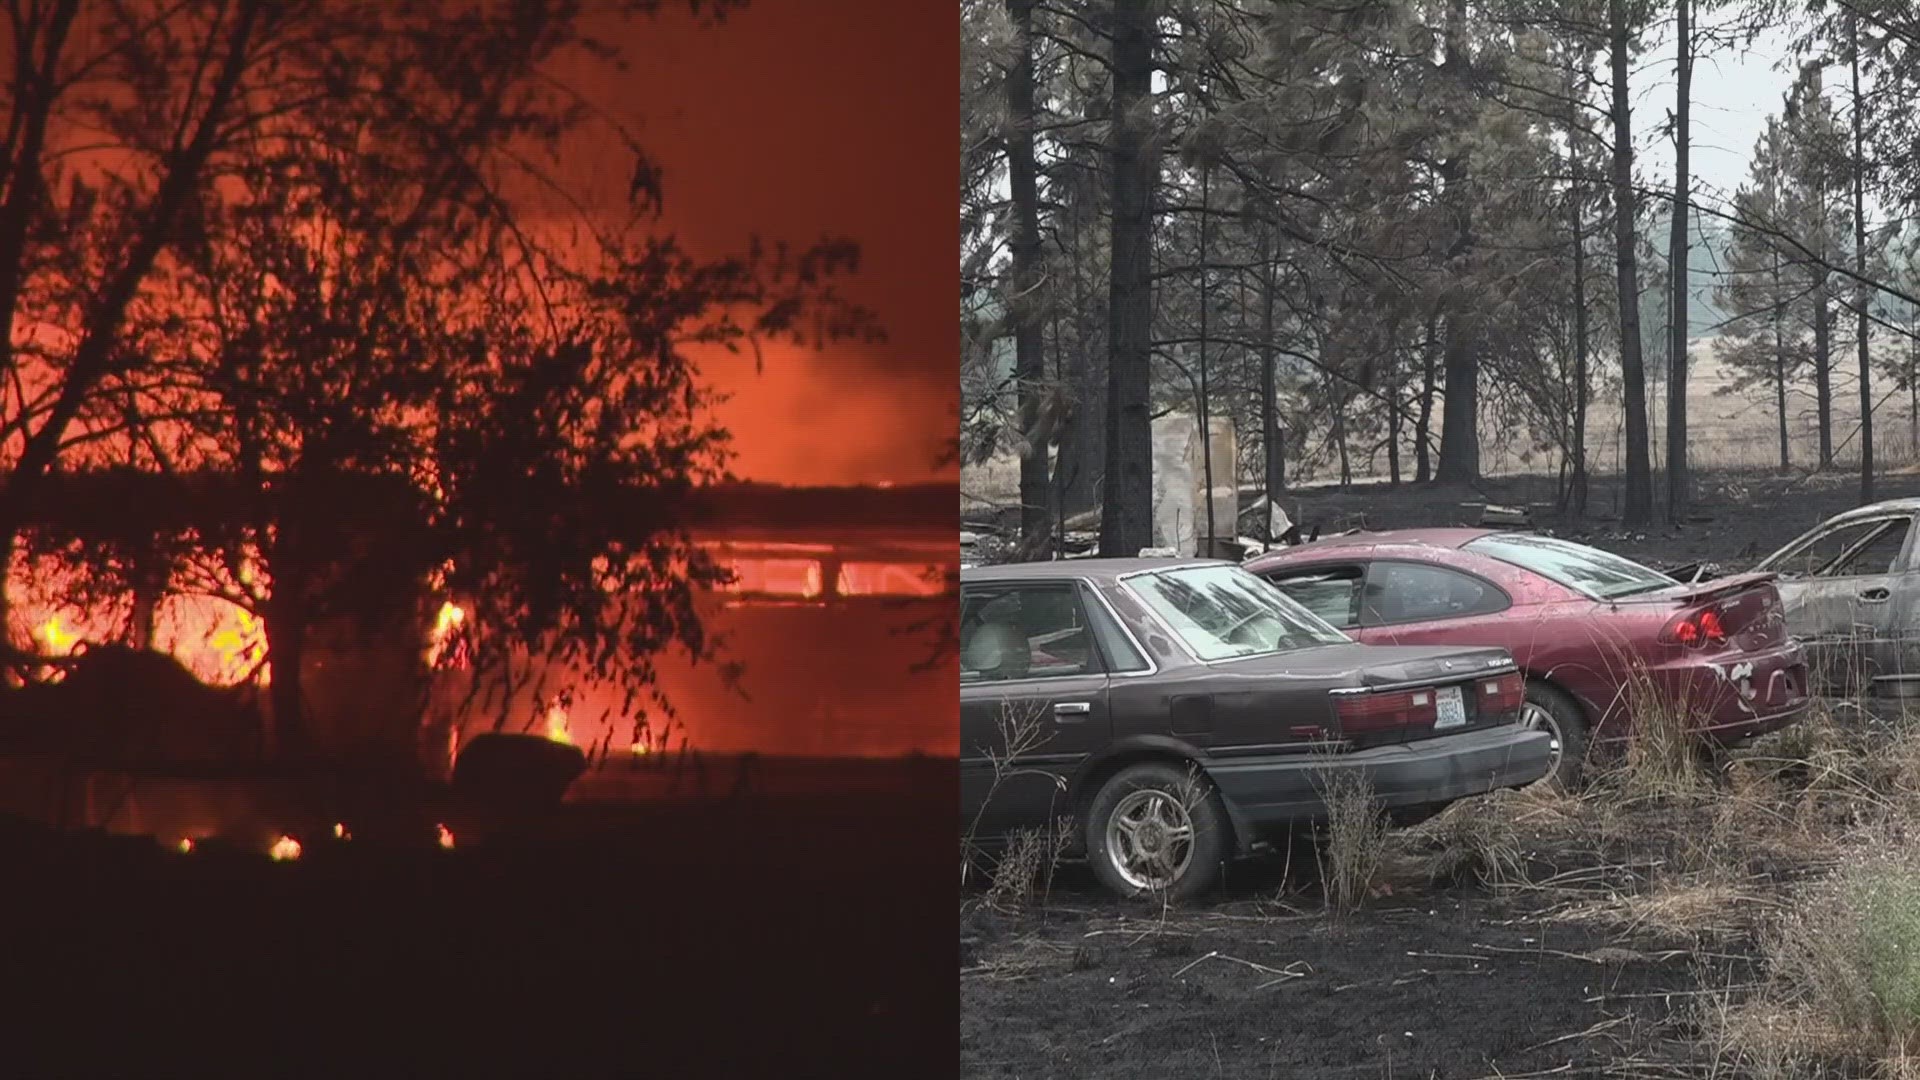 The "Restoring Hope" event aims to restore hope for those impacted by the Gray Fire and will include silent and live auctions, food trucks, merchandise and more.